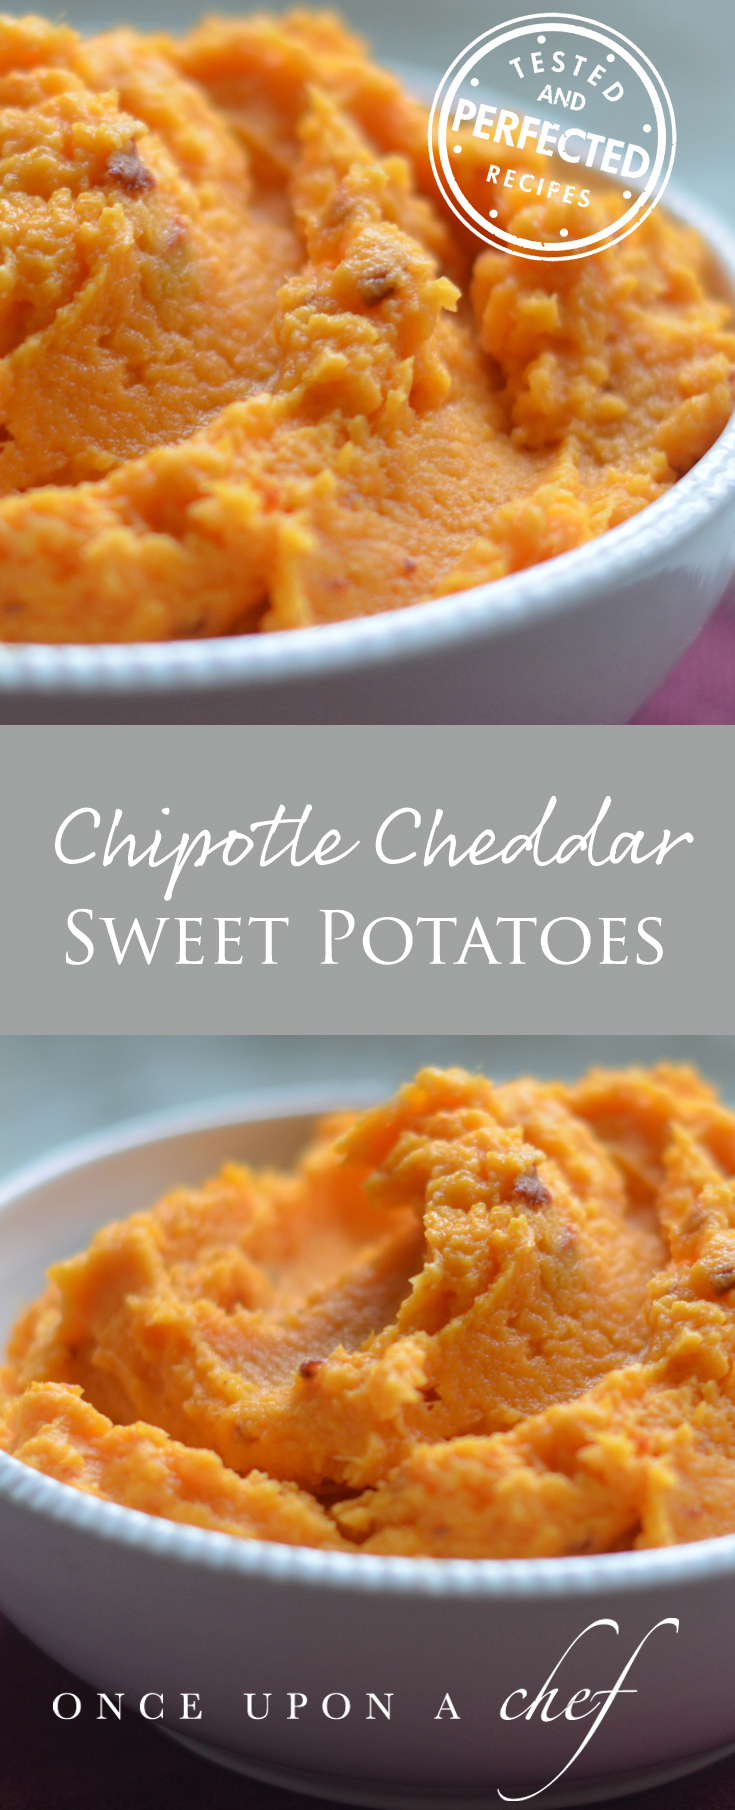 Mashed Chipotle Cheddar Sweet Potatoes - Once Upon a Chef